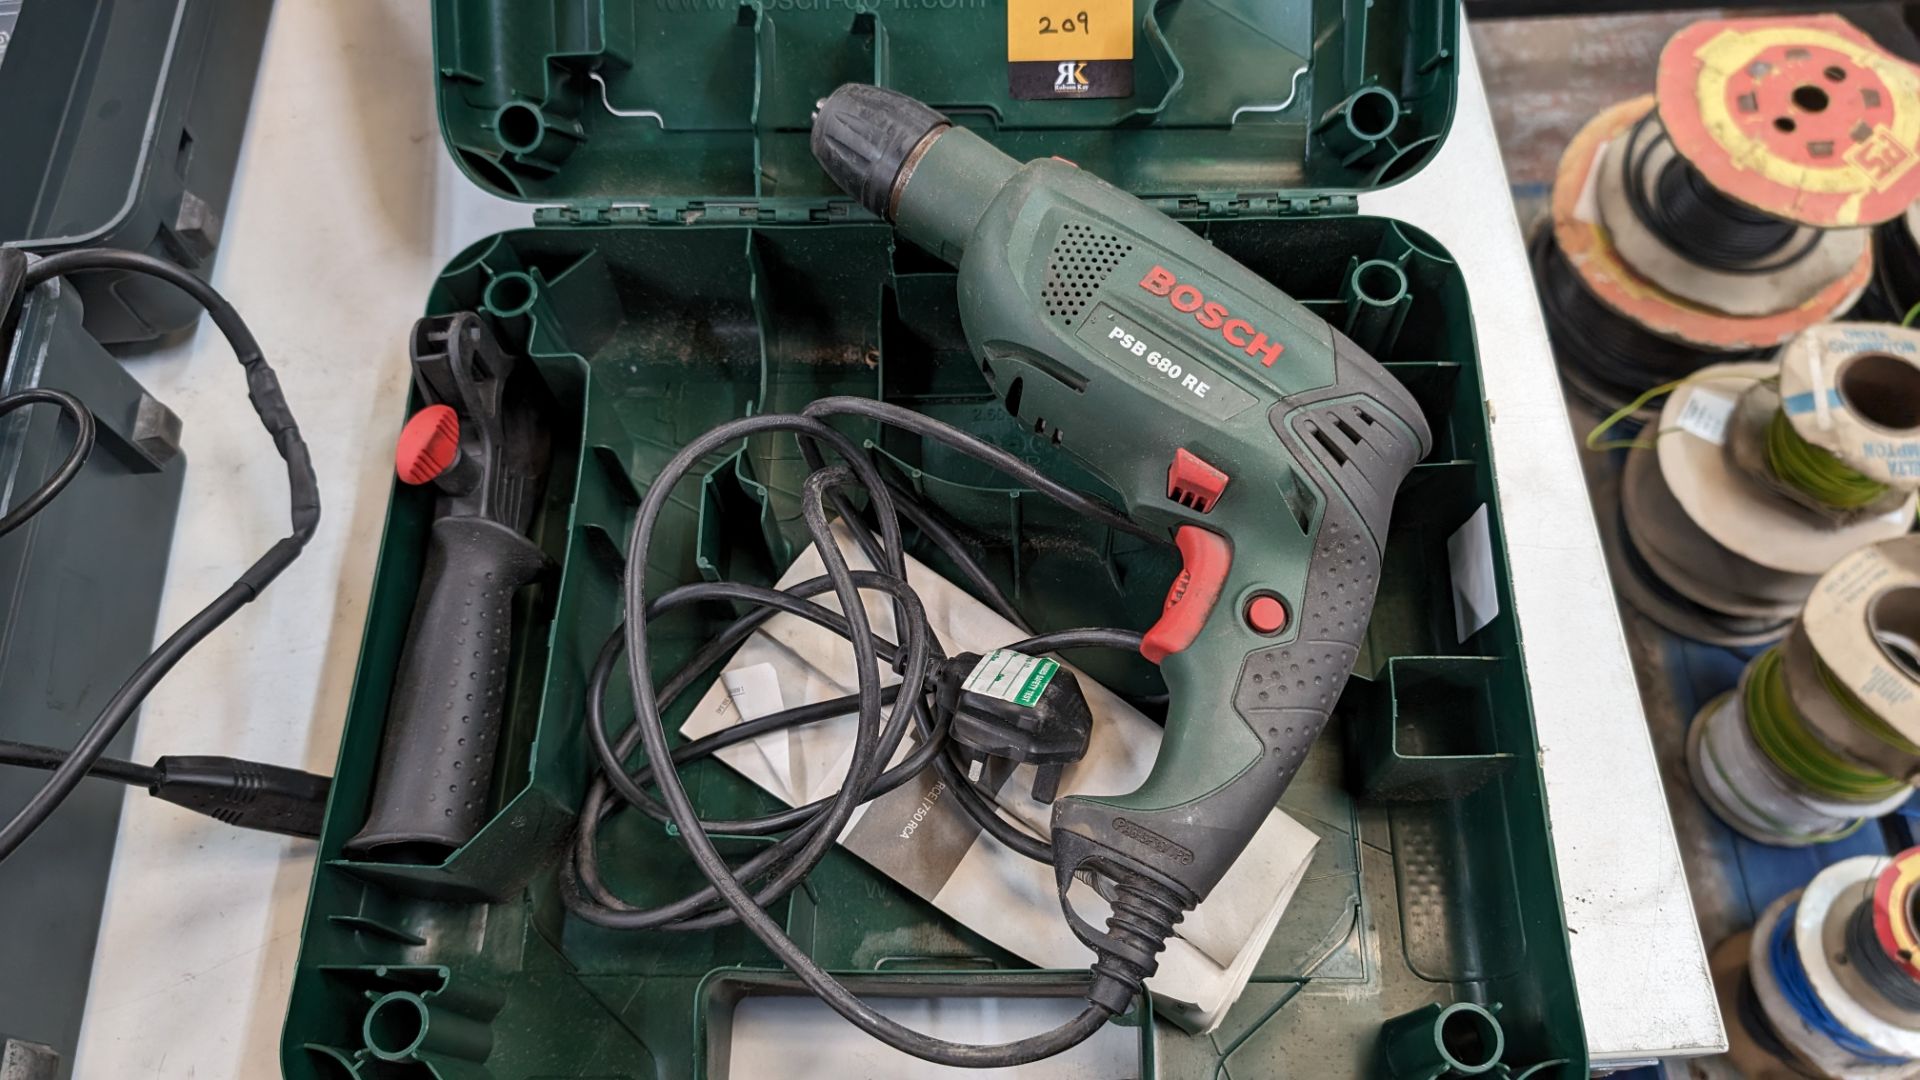 Bosch PSB680RE drill in case - Image 5 of 5